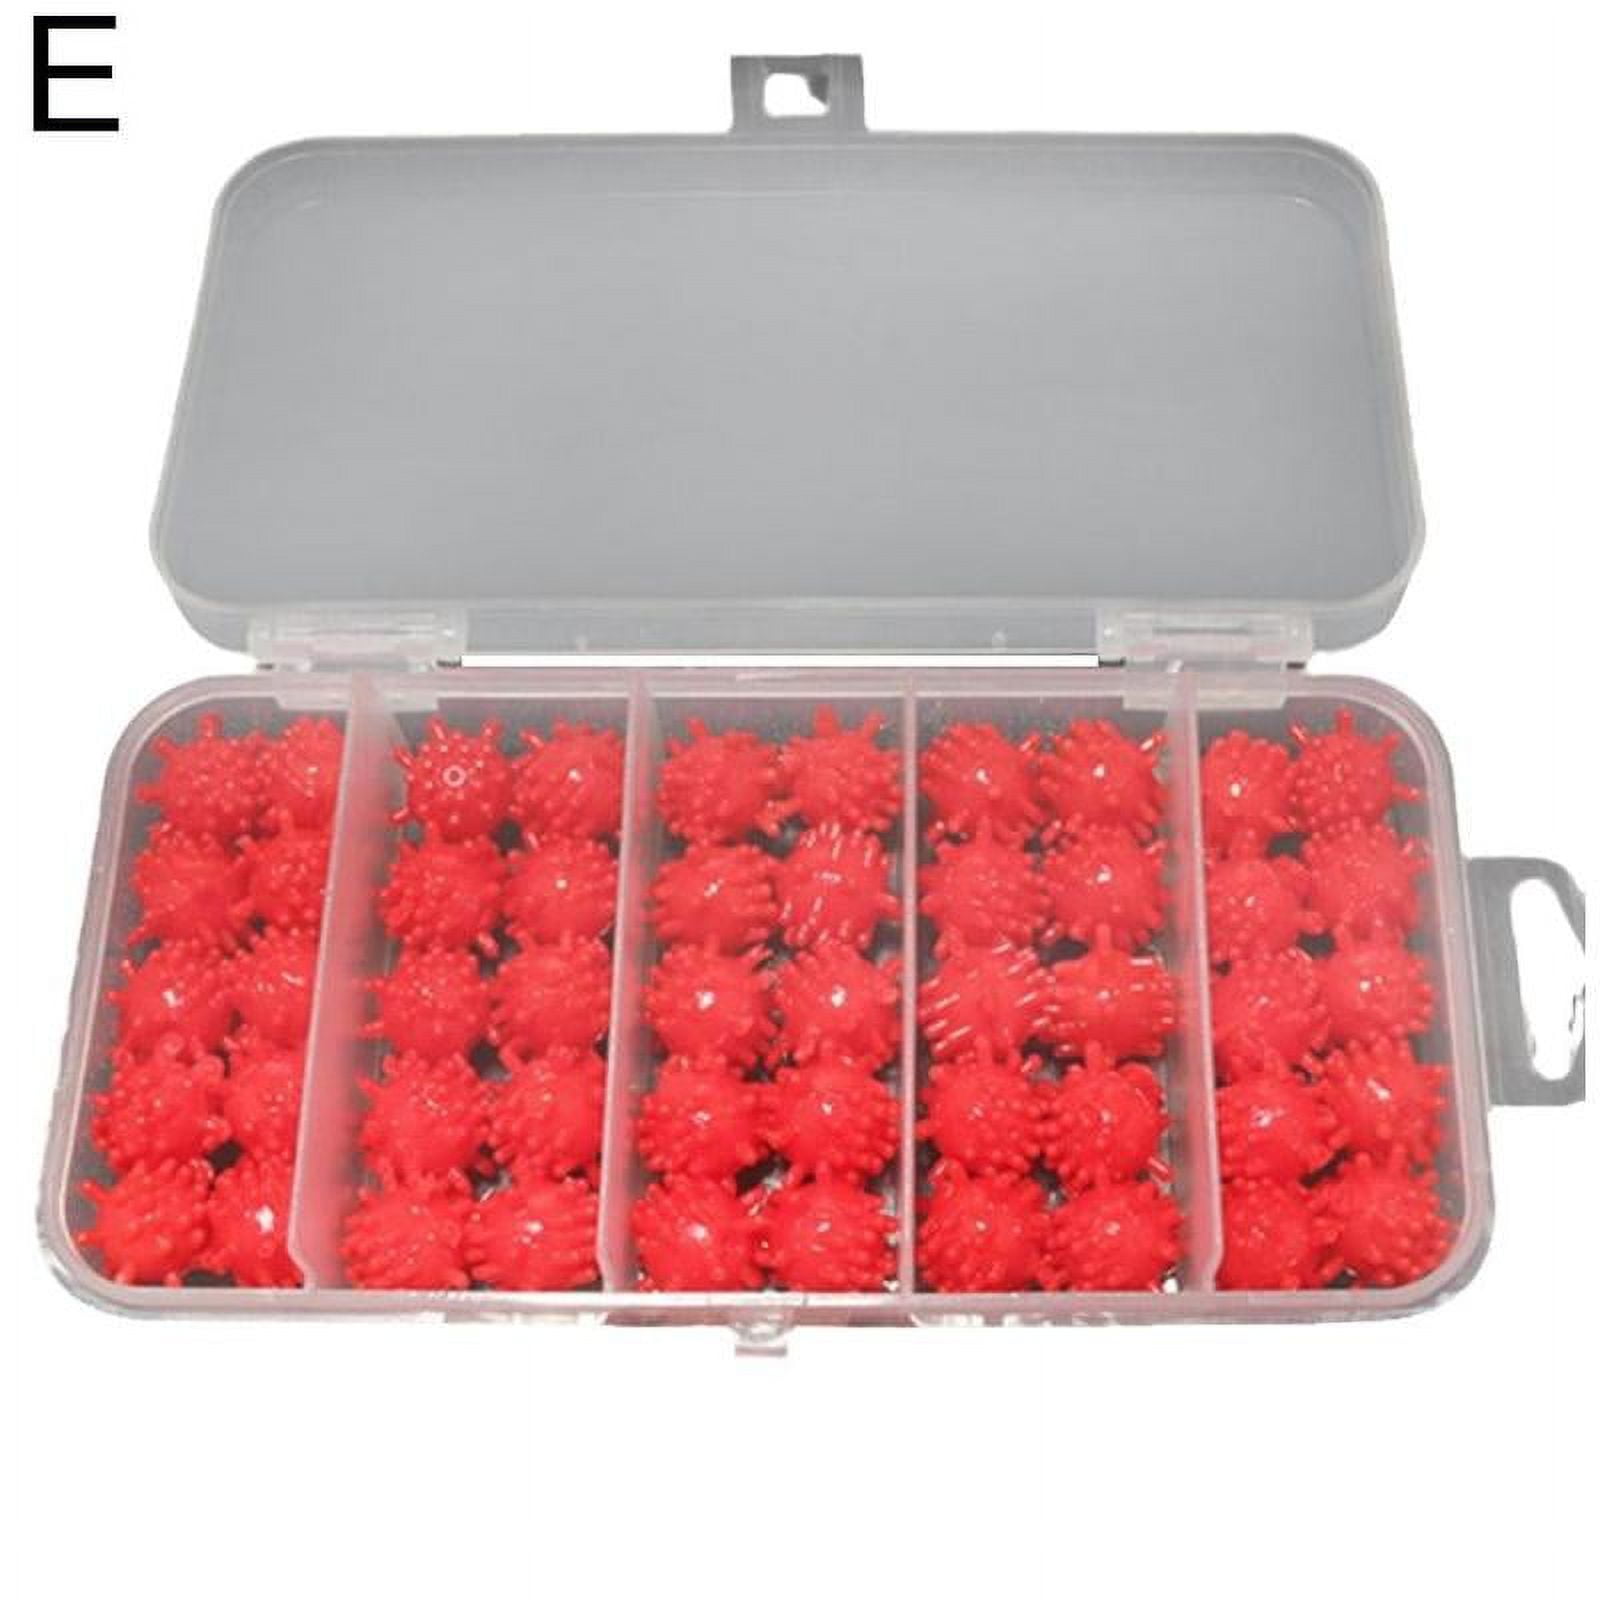 1 Box Floating Bait Jelly Soft Fishing Lure Silicone Cream Corn Smell S3  G4A6 